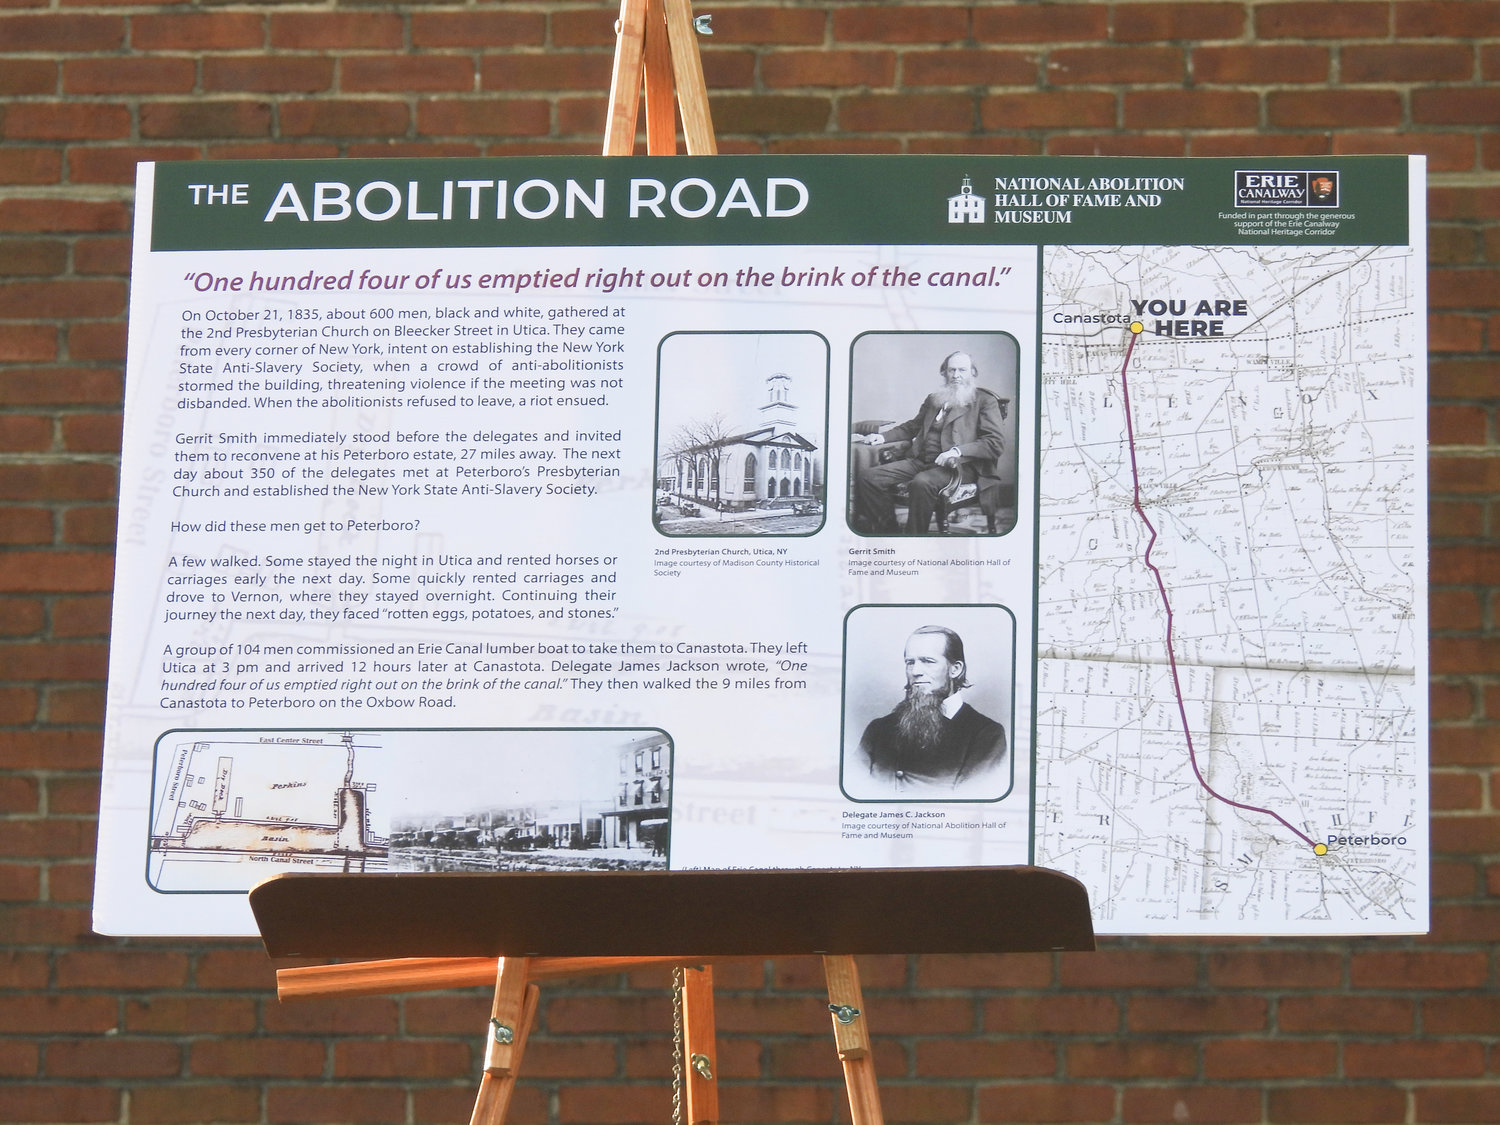 The new signs going up along the same trail the New York Antislavery Society members did after being chased by a hostile mob and making their way to Peterboro.